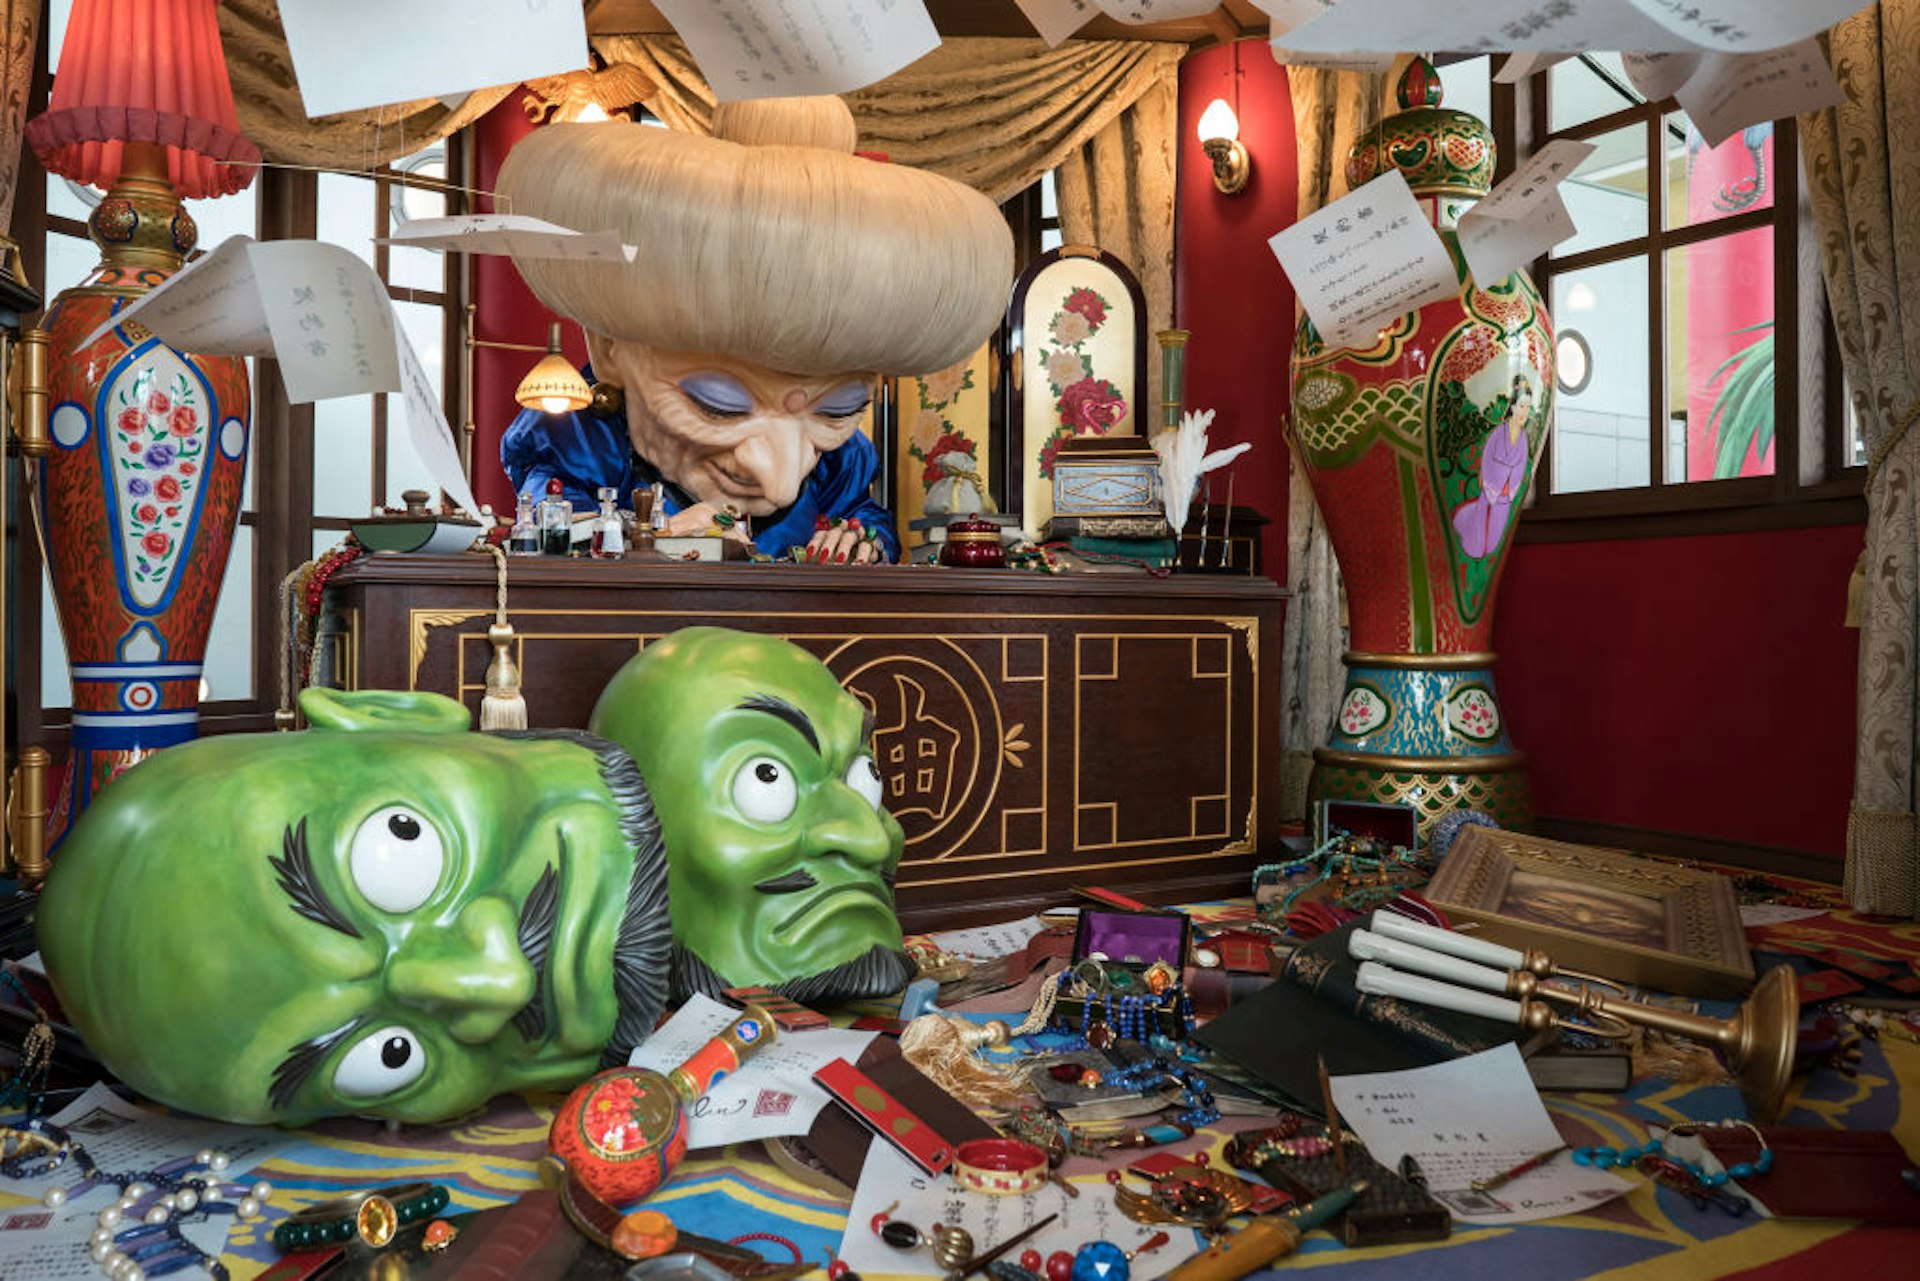 A display of Yubaba, an animation character from the film 'Spirited Away', that is copyrighted by Studio Ghibli, is seen in the Ghibli's Grand Warehouse area during a preview for the Ghibli Park. 